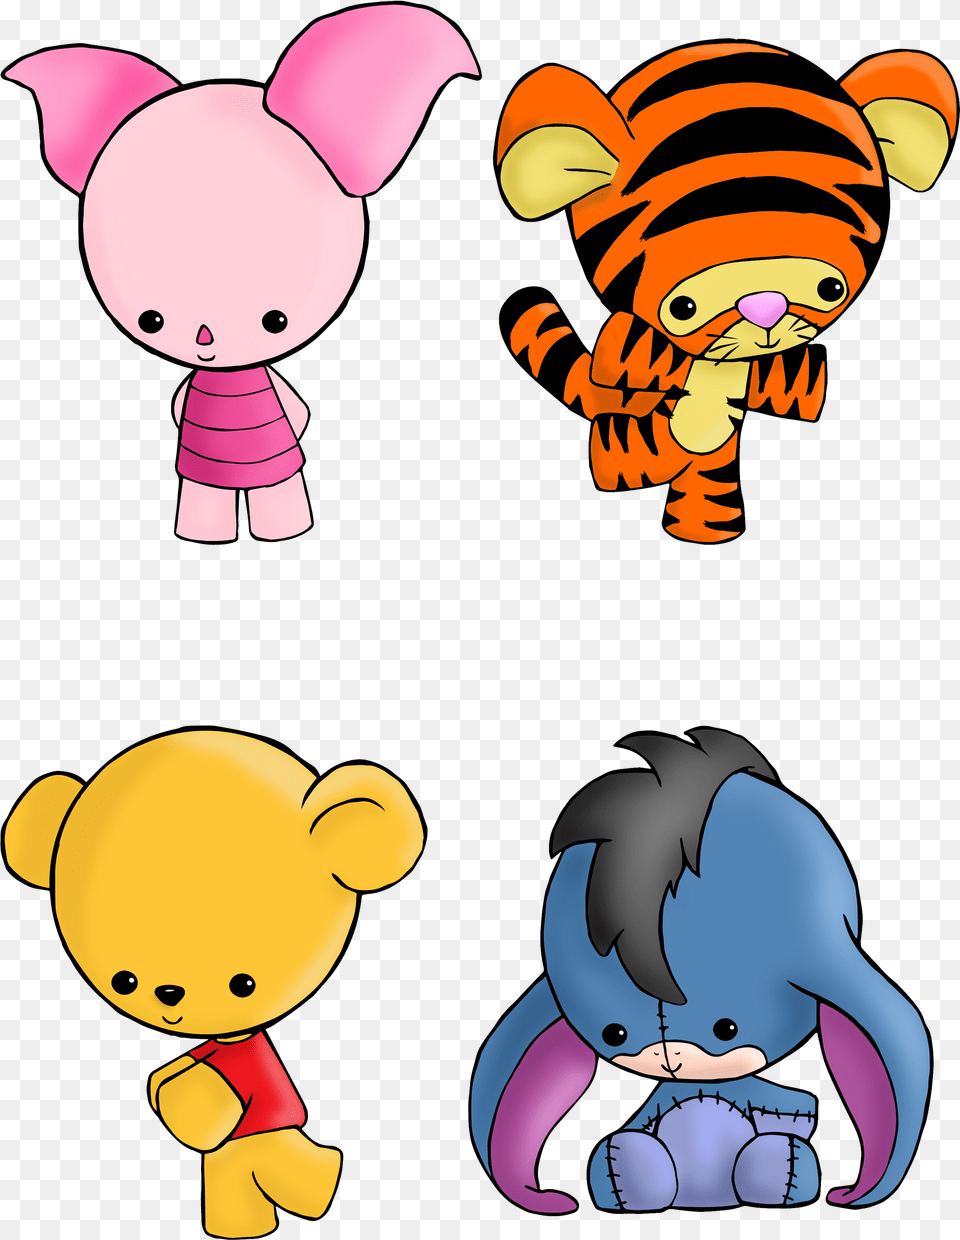 Winnie The Pooh Set Easy Cute Winnie The Pooh Drawings, Baby, Person, Cartoon Png Image